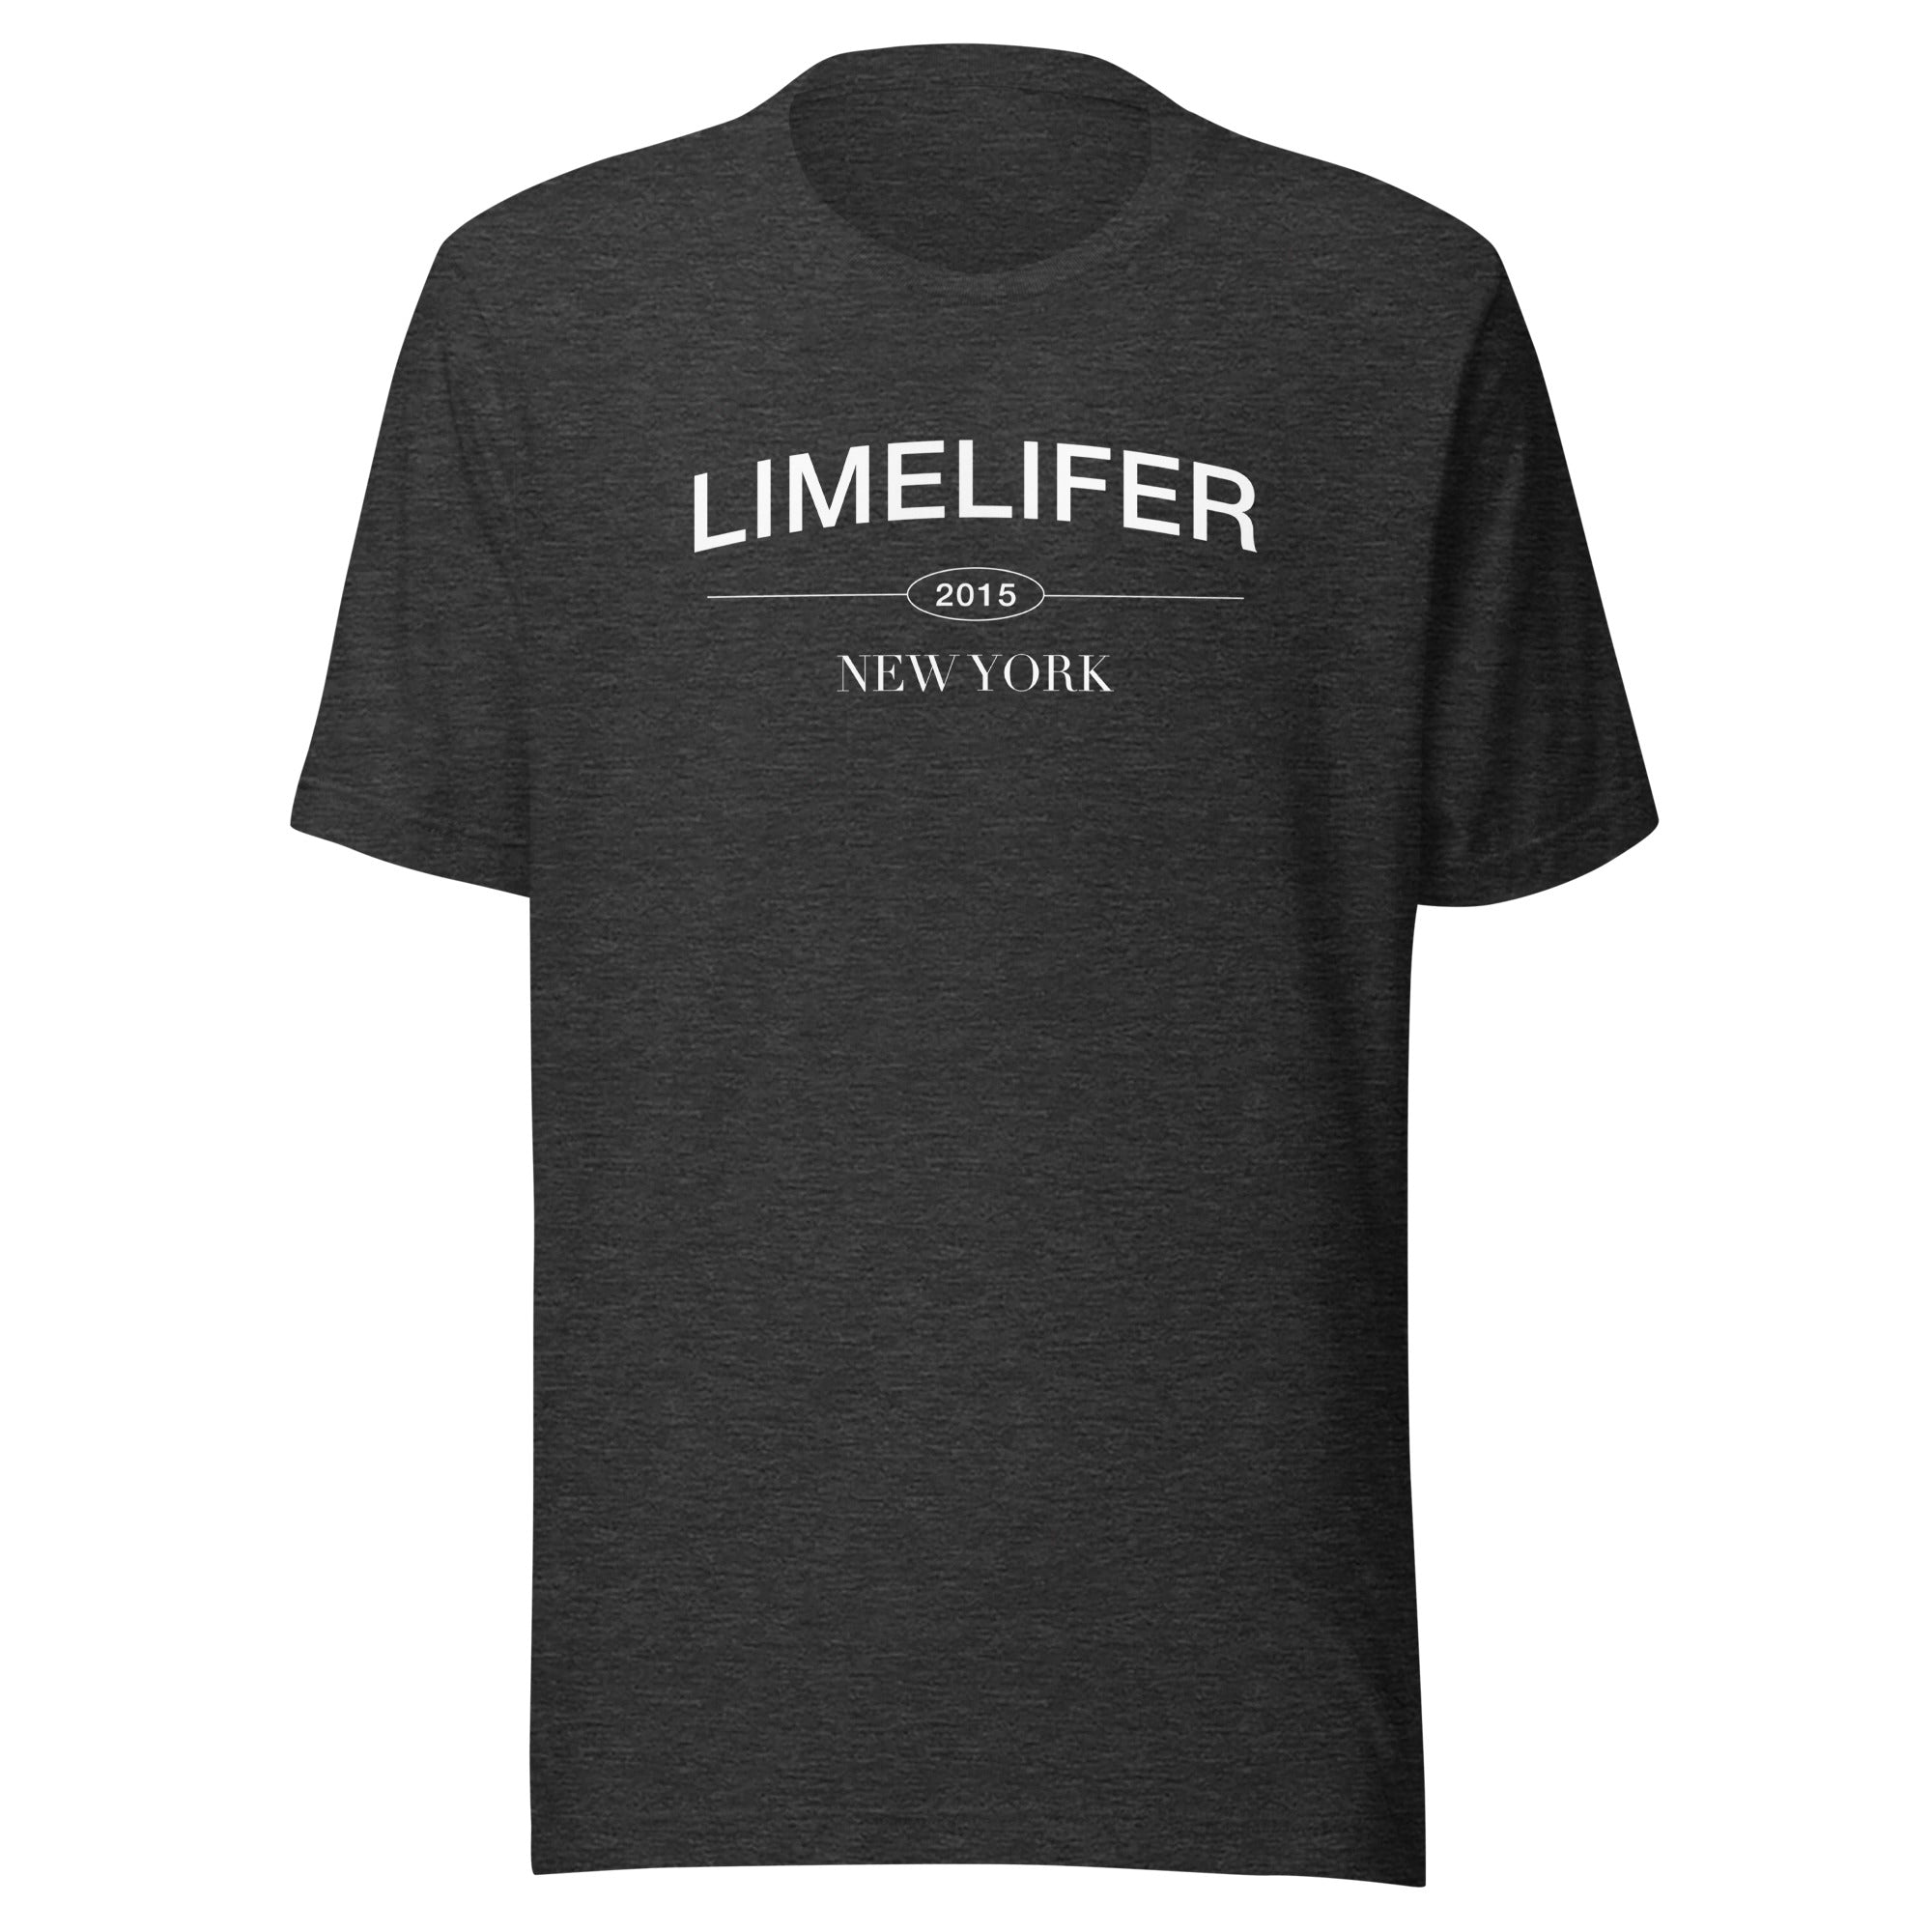 LIMELIFER NY - Unisex t-shirt in Heather Orchid, Black, DarkGrey Heather and Olive